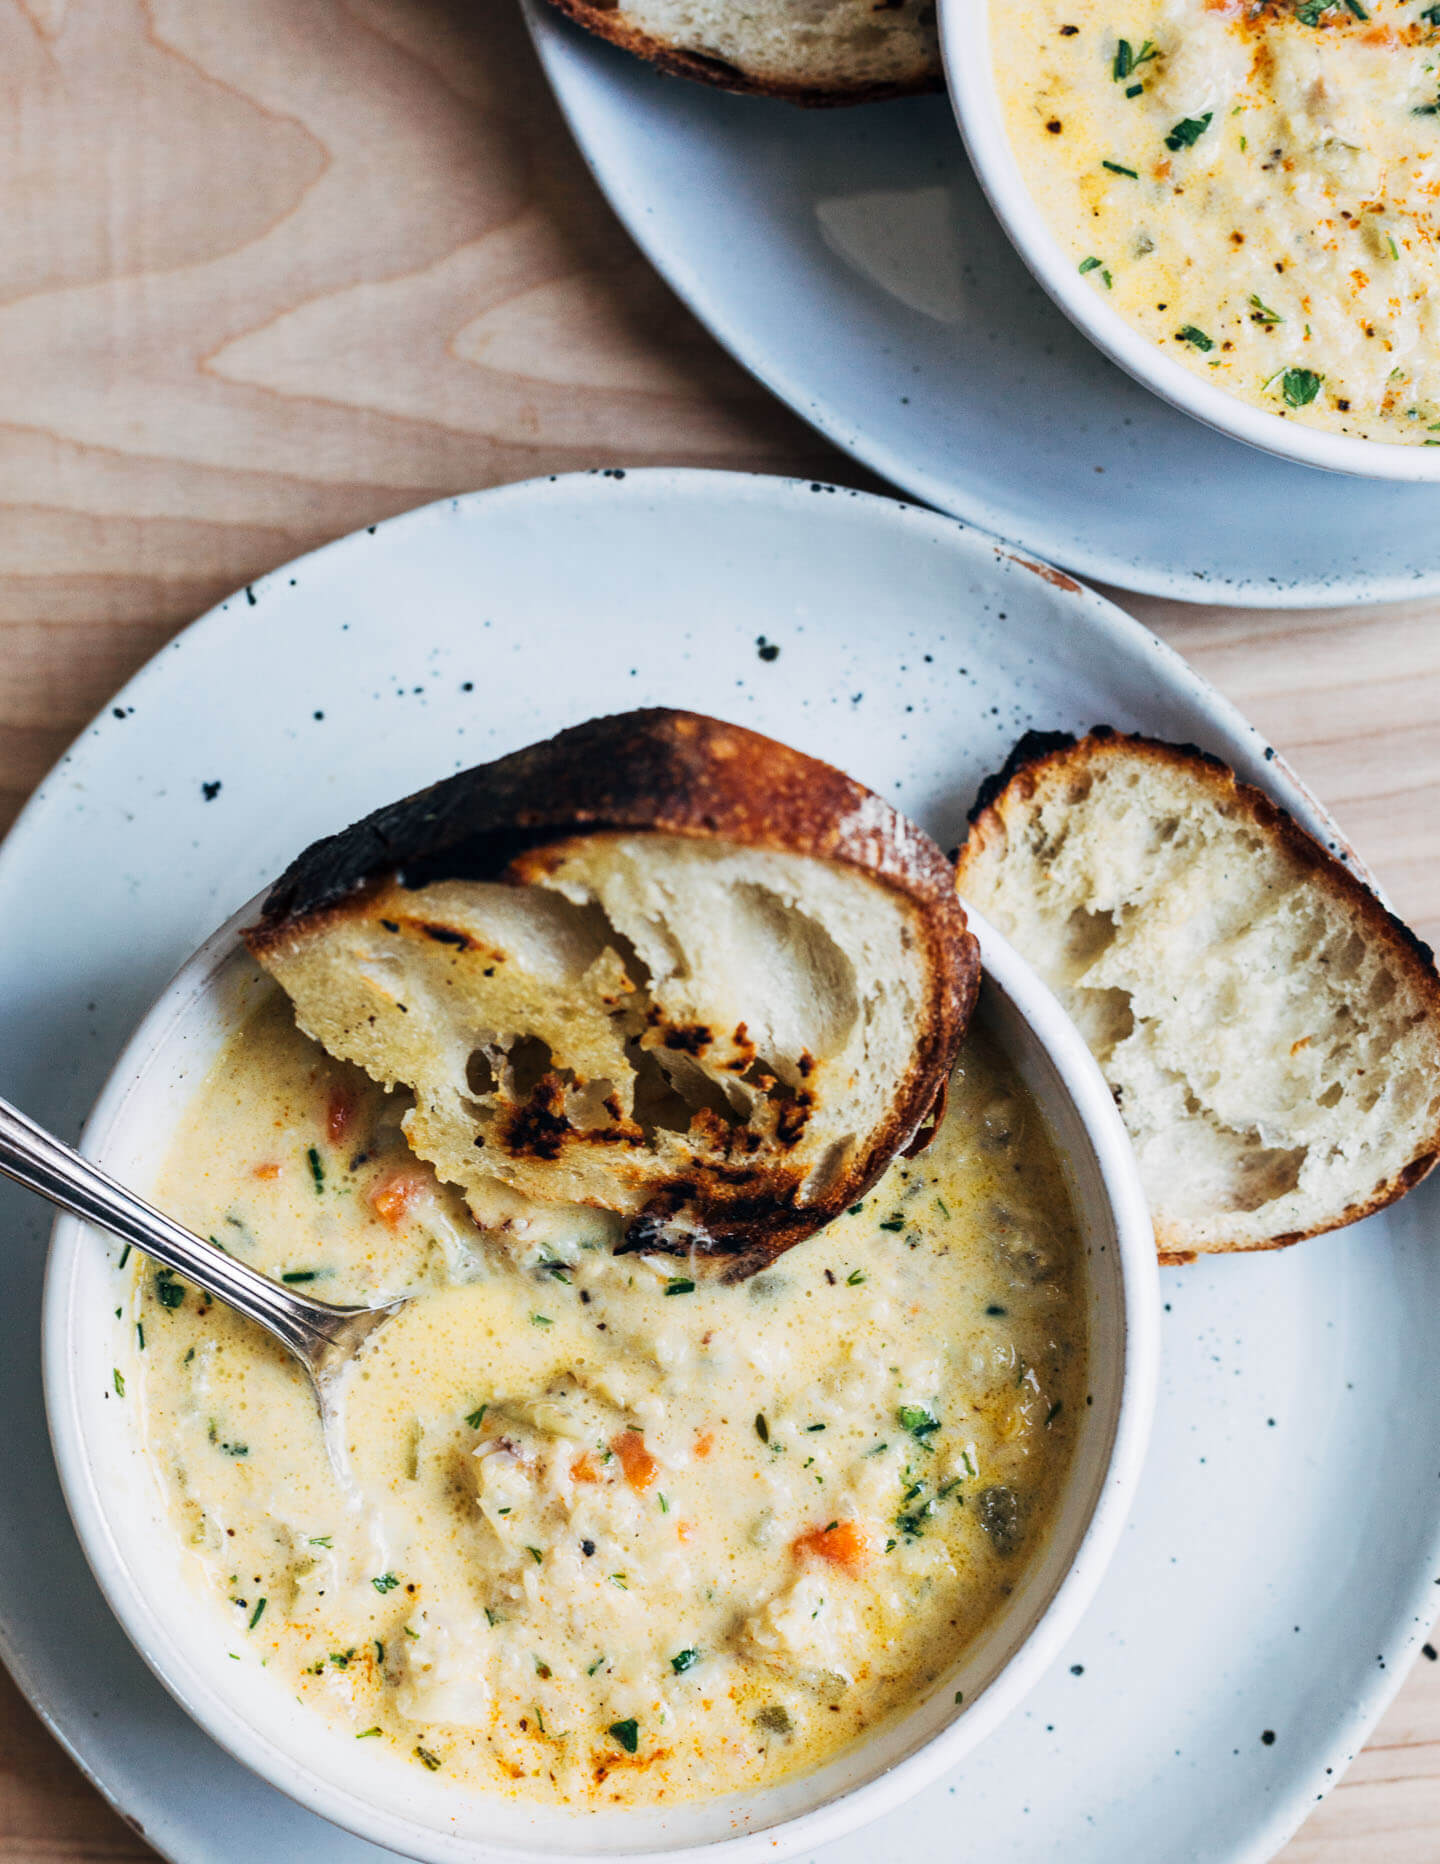 A rich and creamy seafood chowder recipe featuring cod, crab, a mix of potatoes and turnips, and wild chives. 